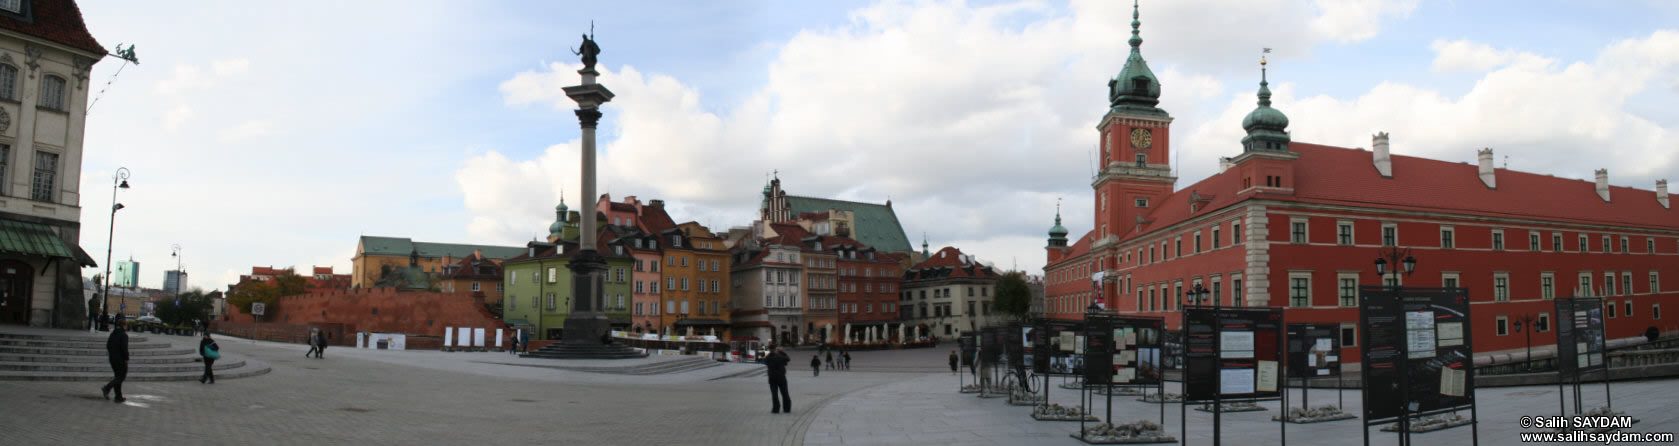 Old Town Panorama 08 (Castle Square, Warsaw, Poland)